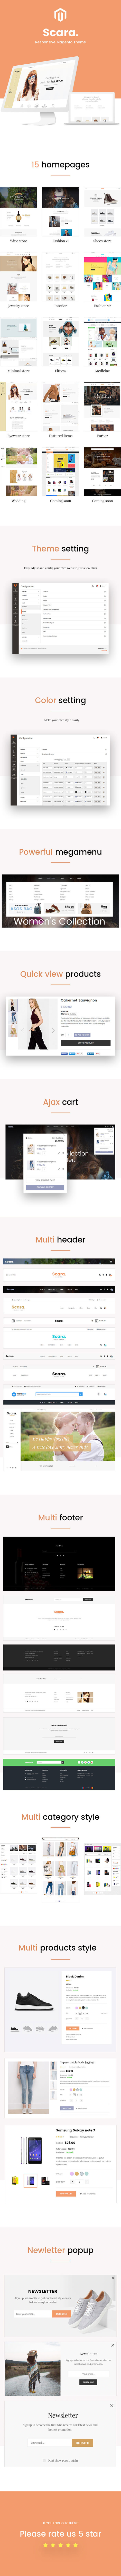 Scara- Multipurpose Magento 2 Theme for Online Store - 3